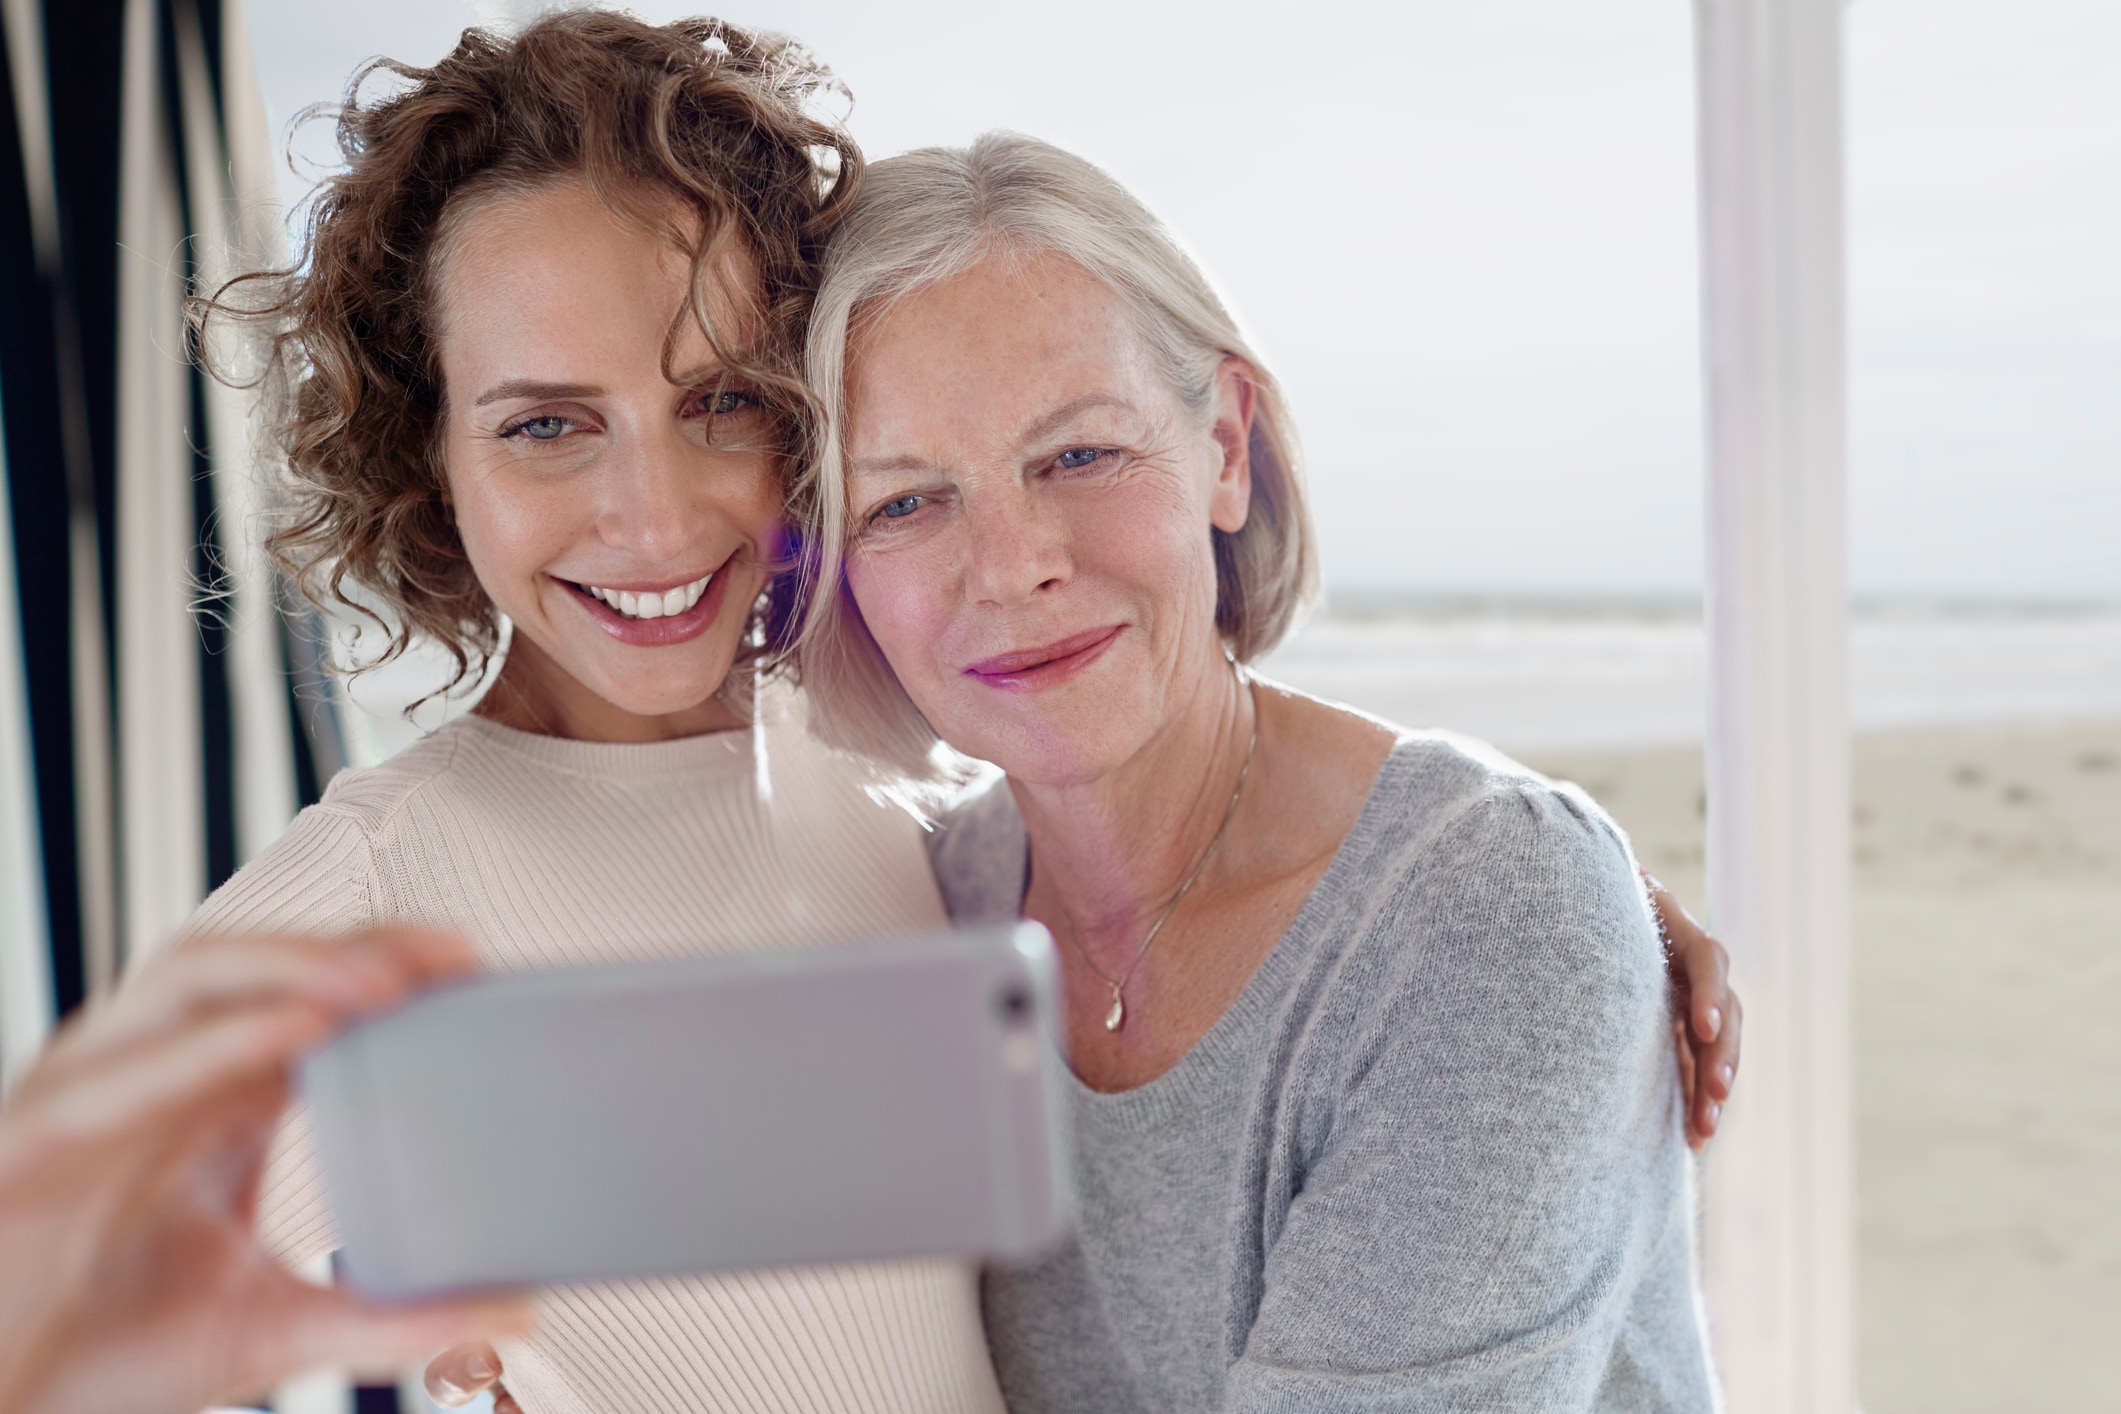 How to help older adults navigate the difficult emotional effects of aging